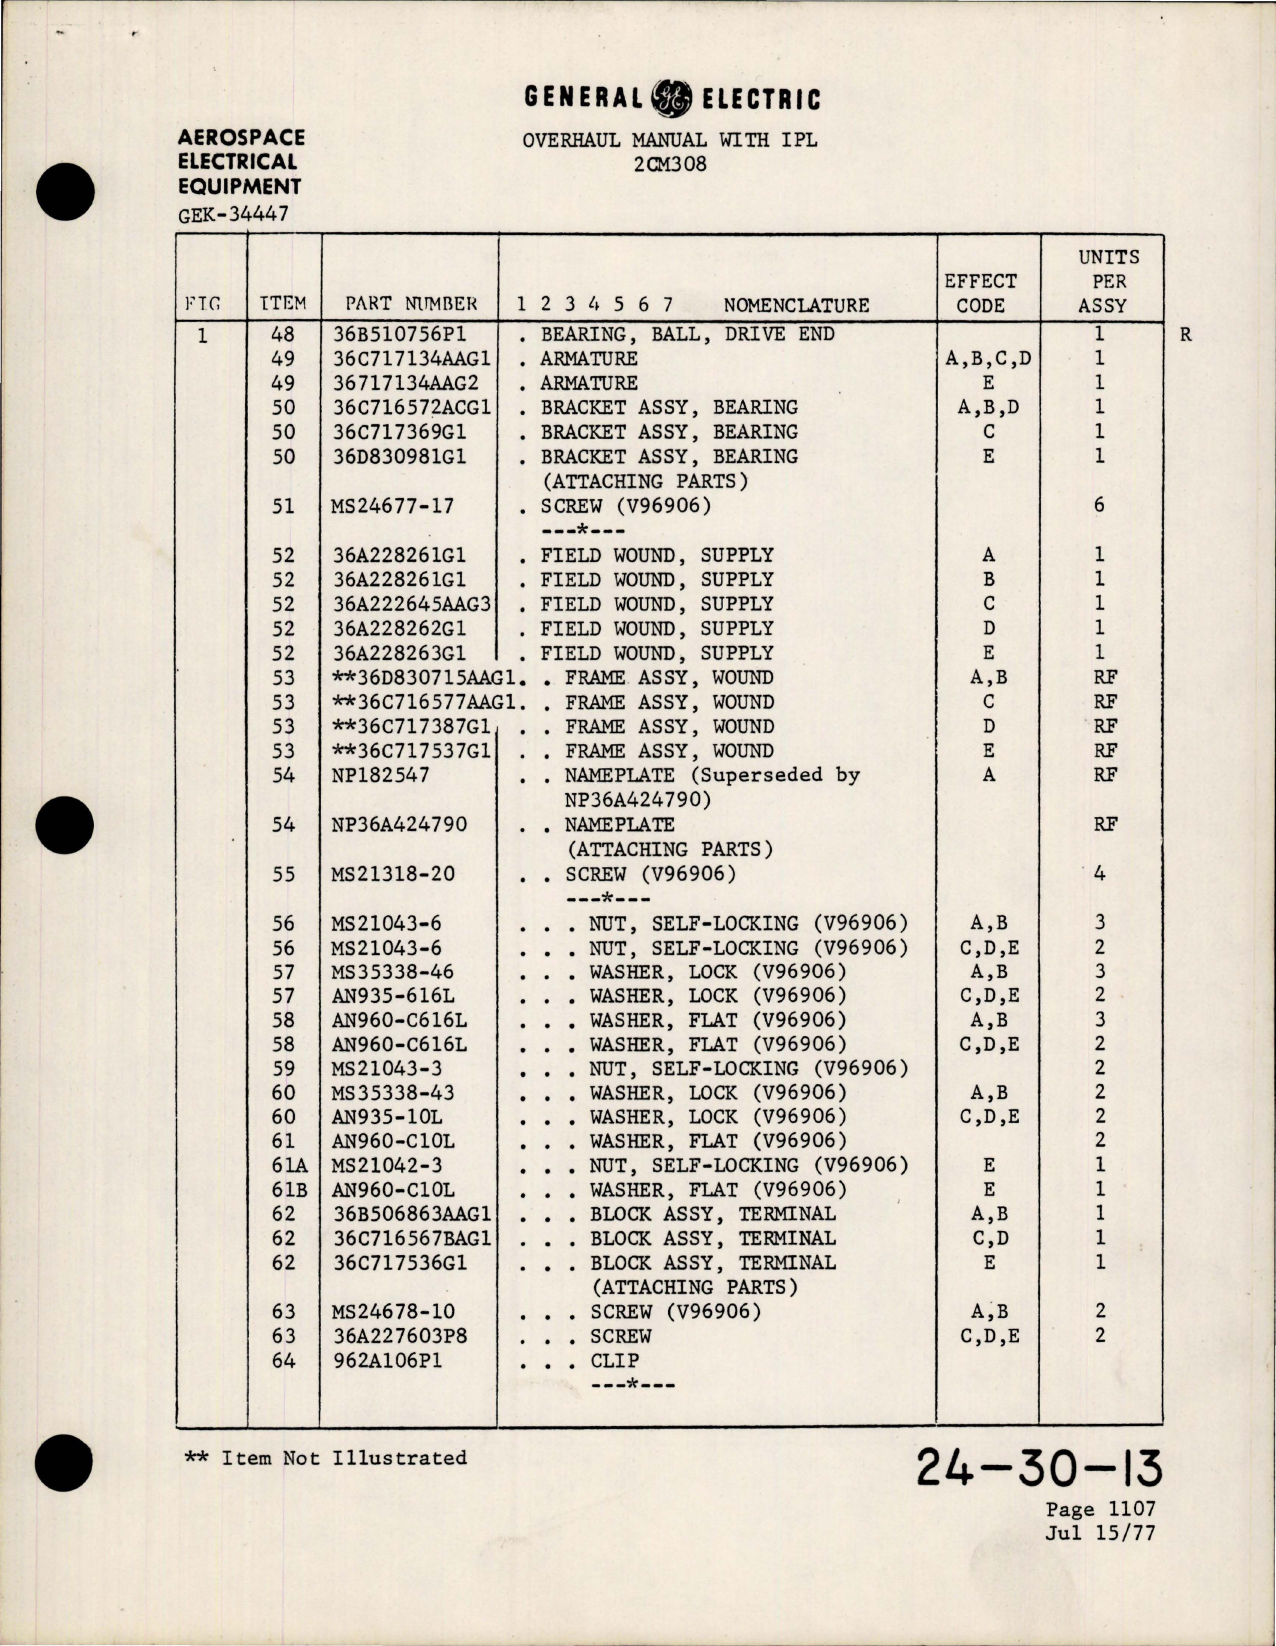 Sample page 5 from AirCorps Library document: Overhaul with Illustrated Parts List for DC Starter Generator 